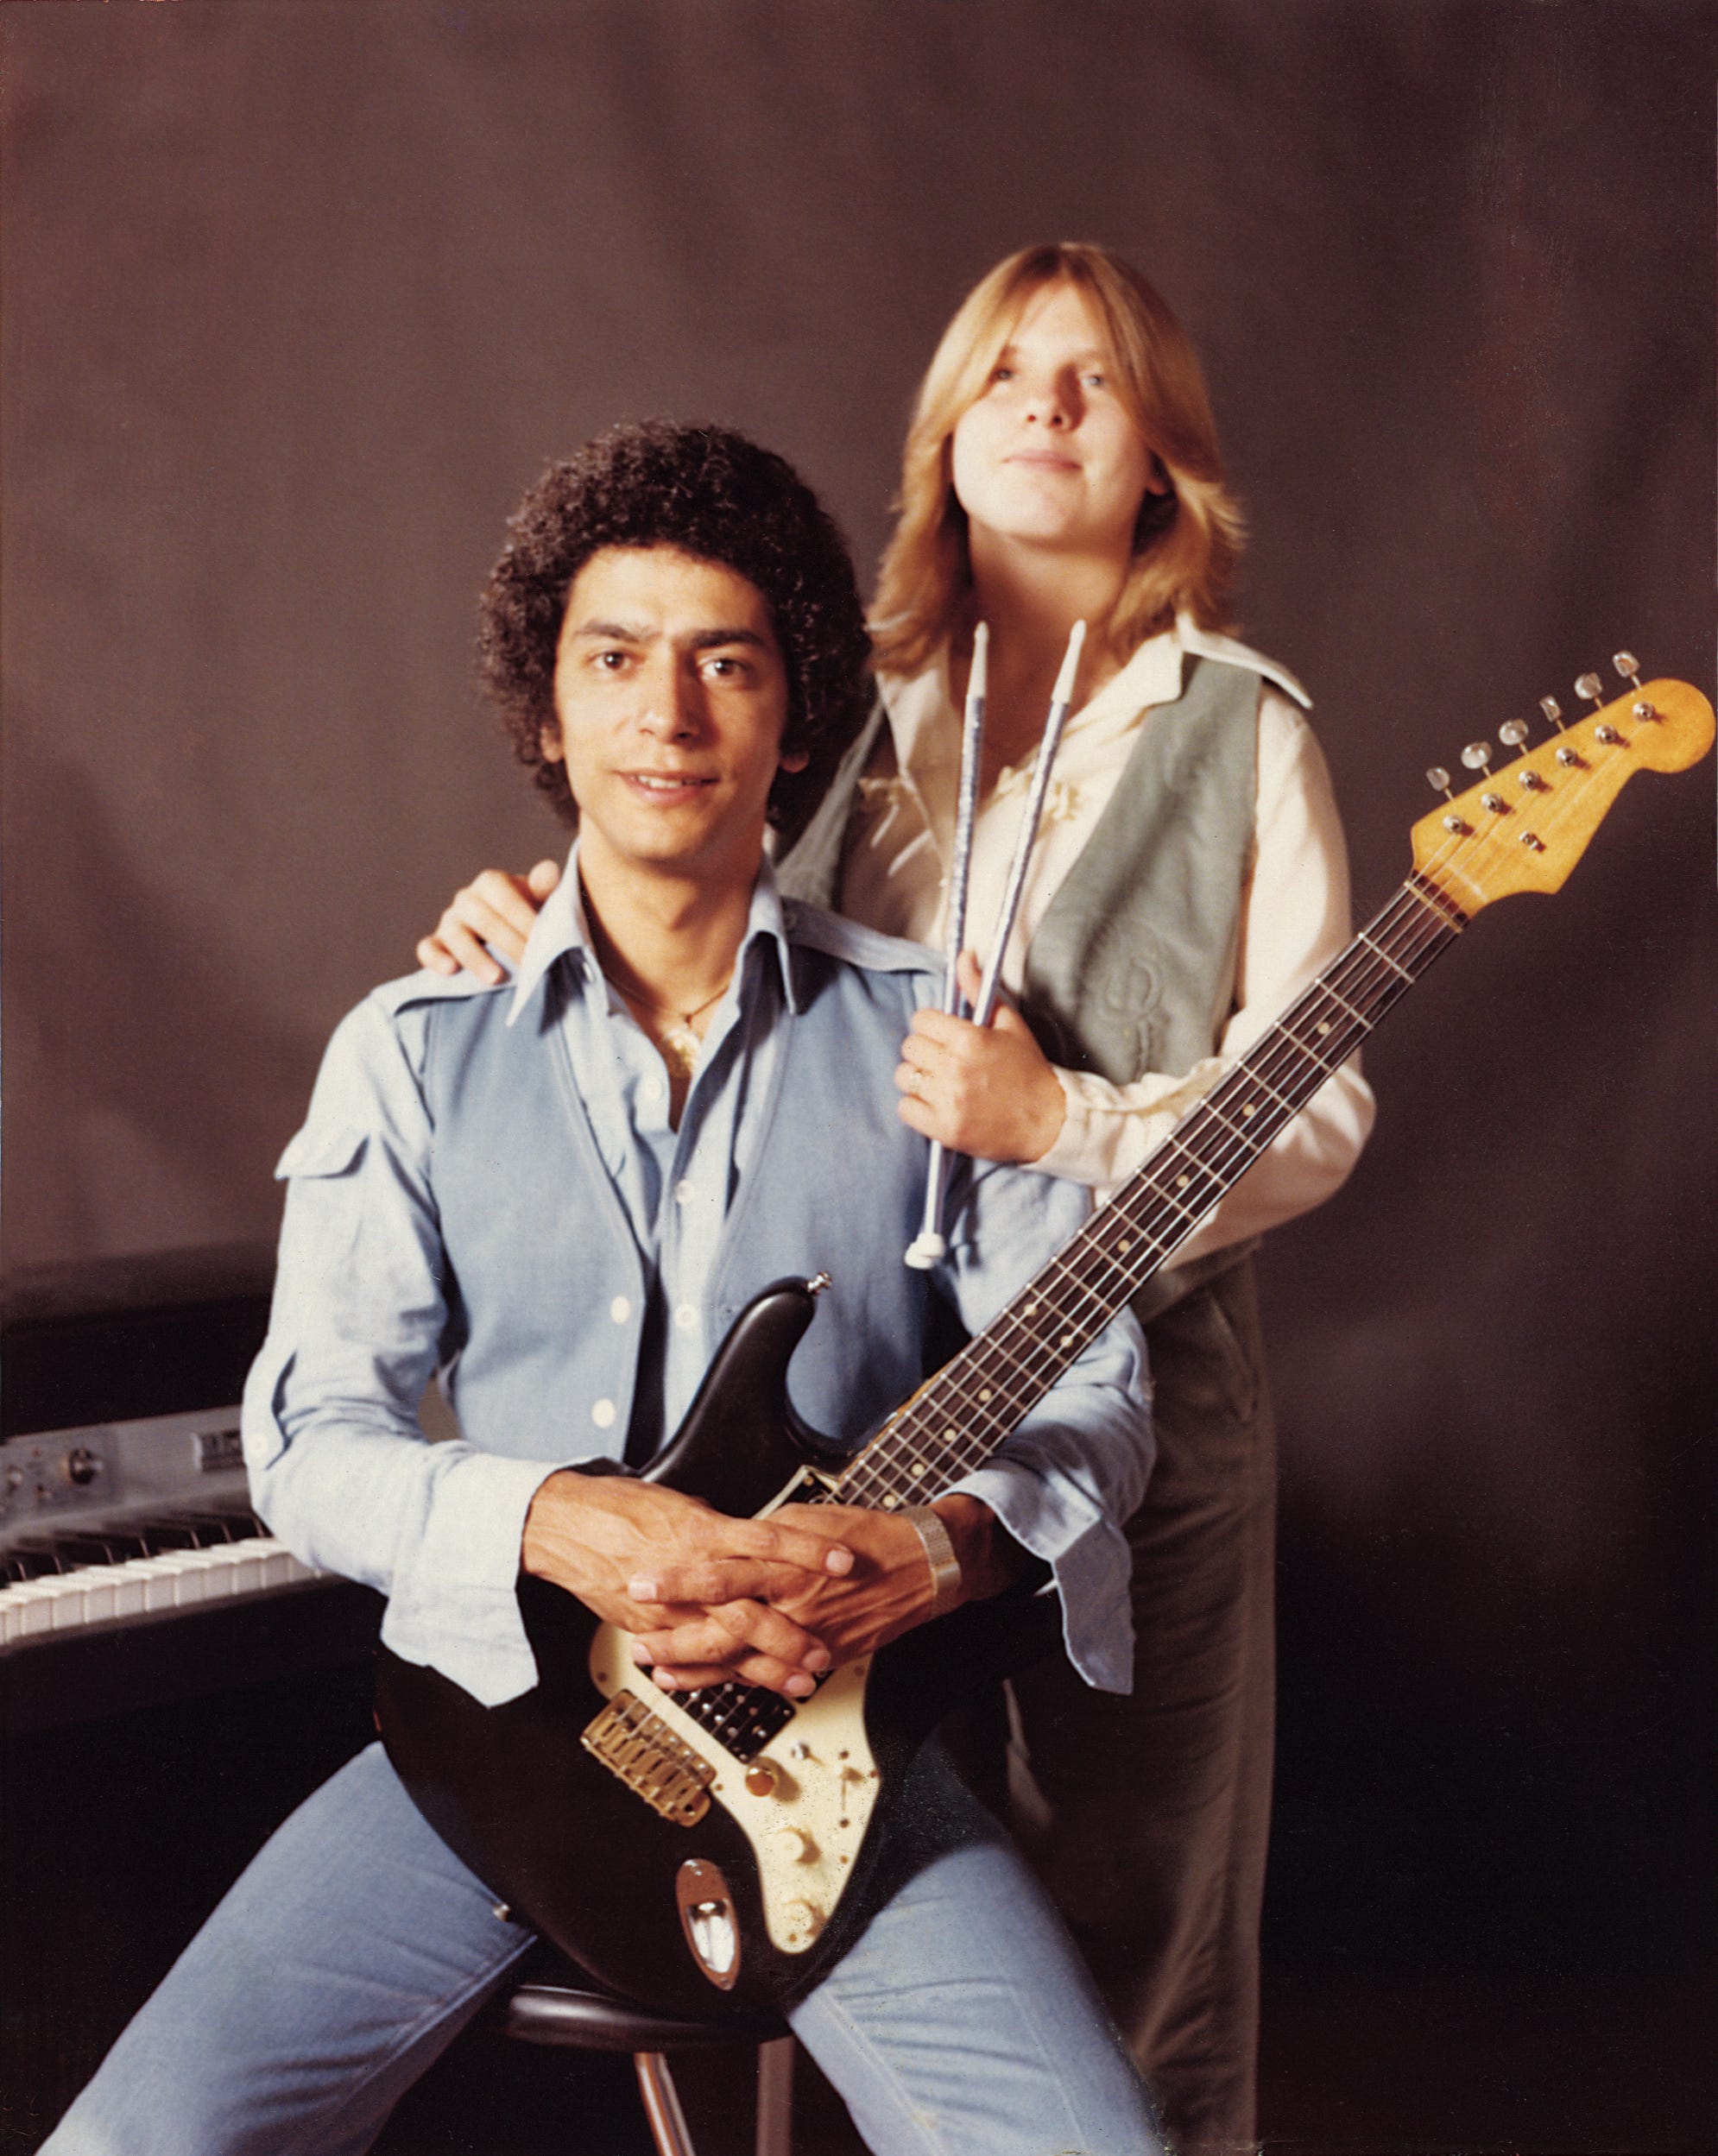 Promotional picture of Michael North and Yancy Kay Blanton.